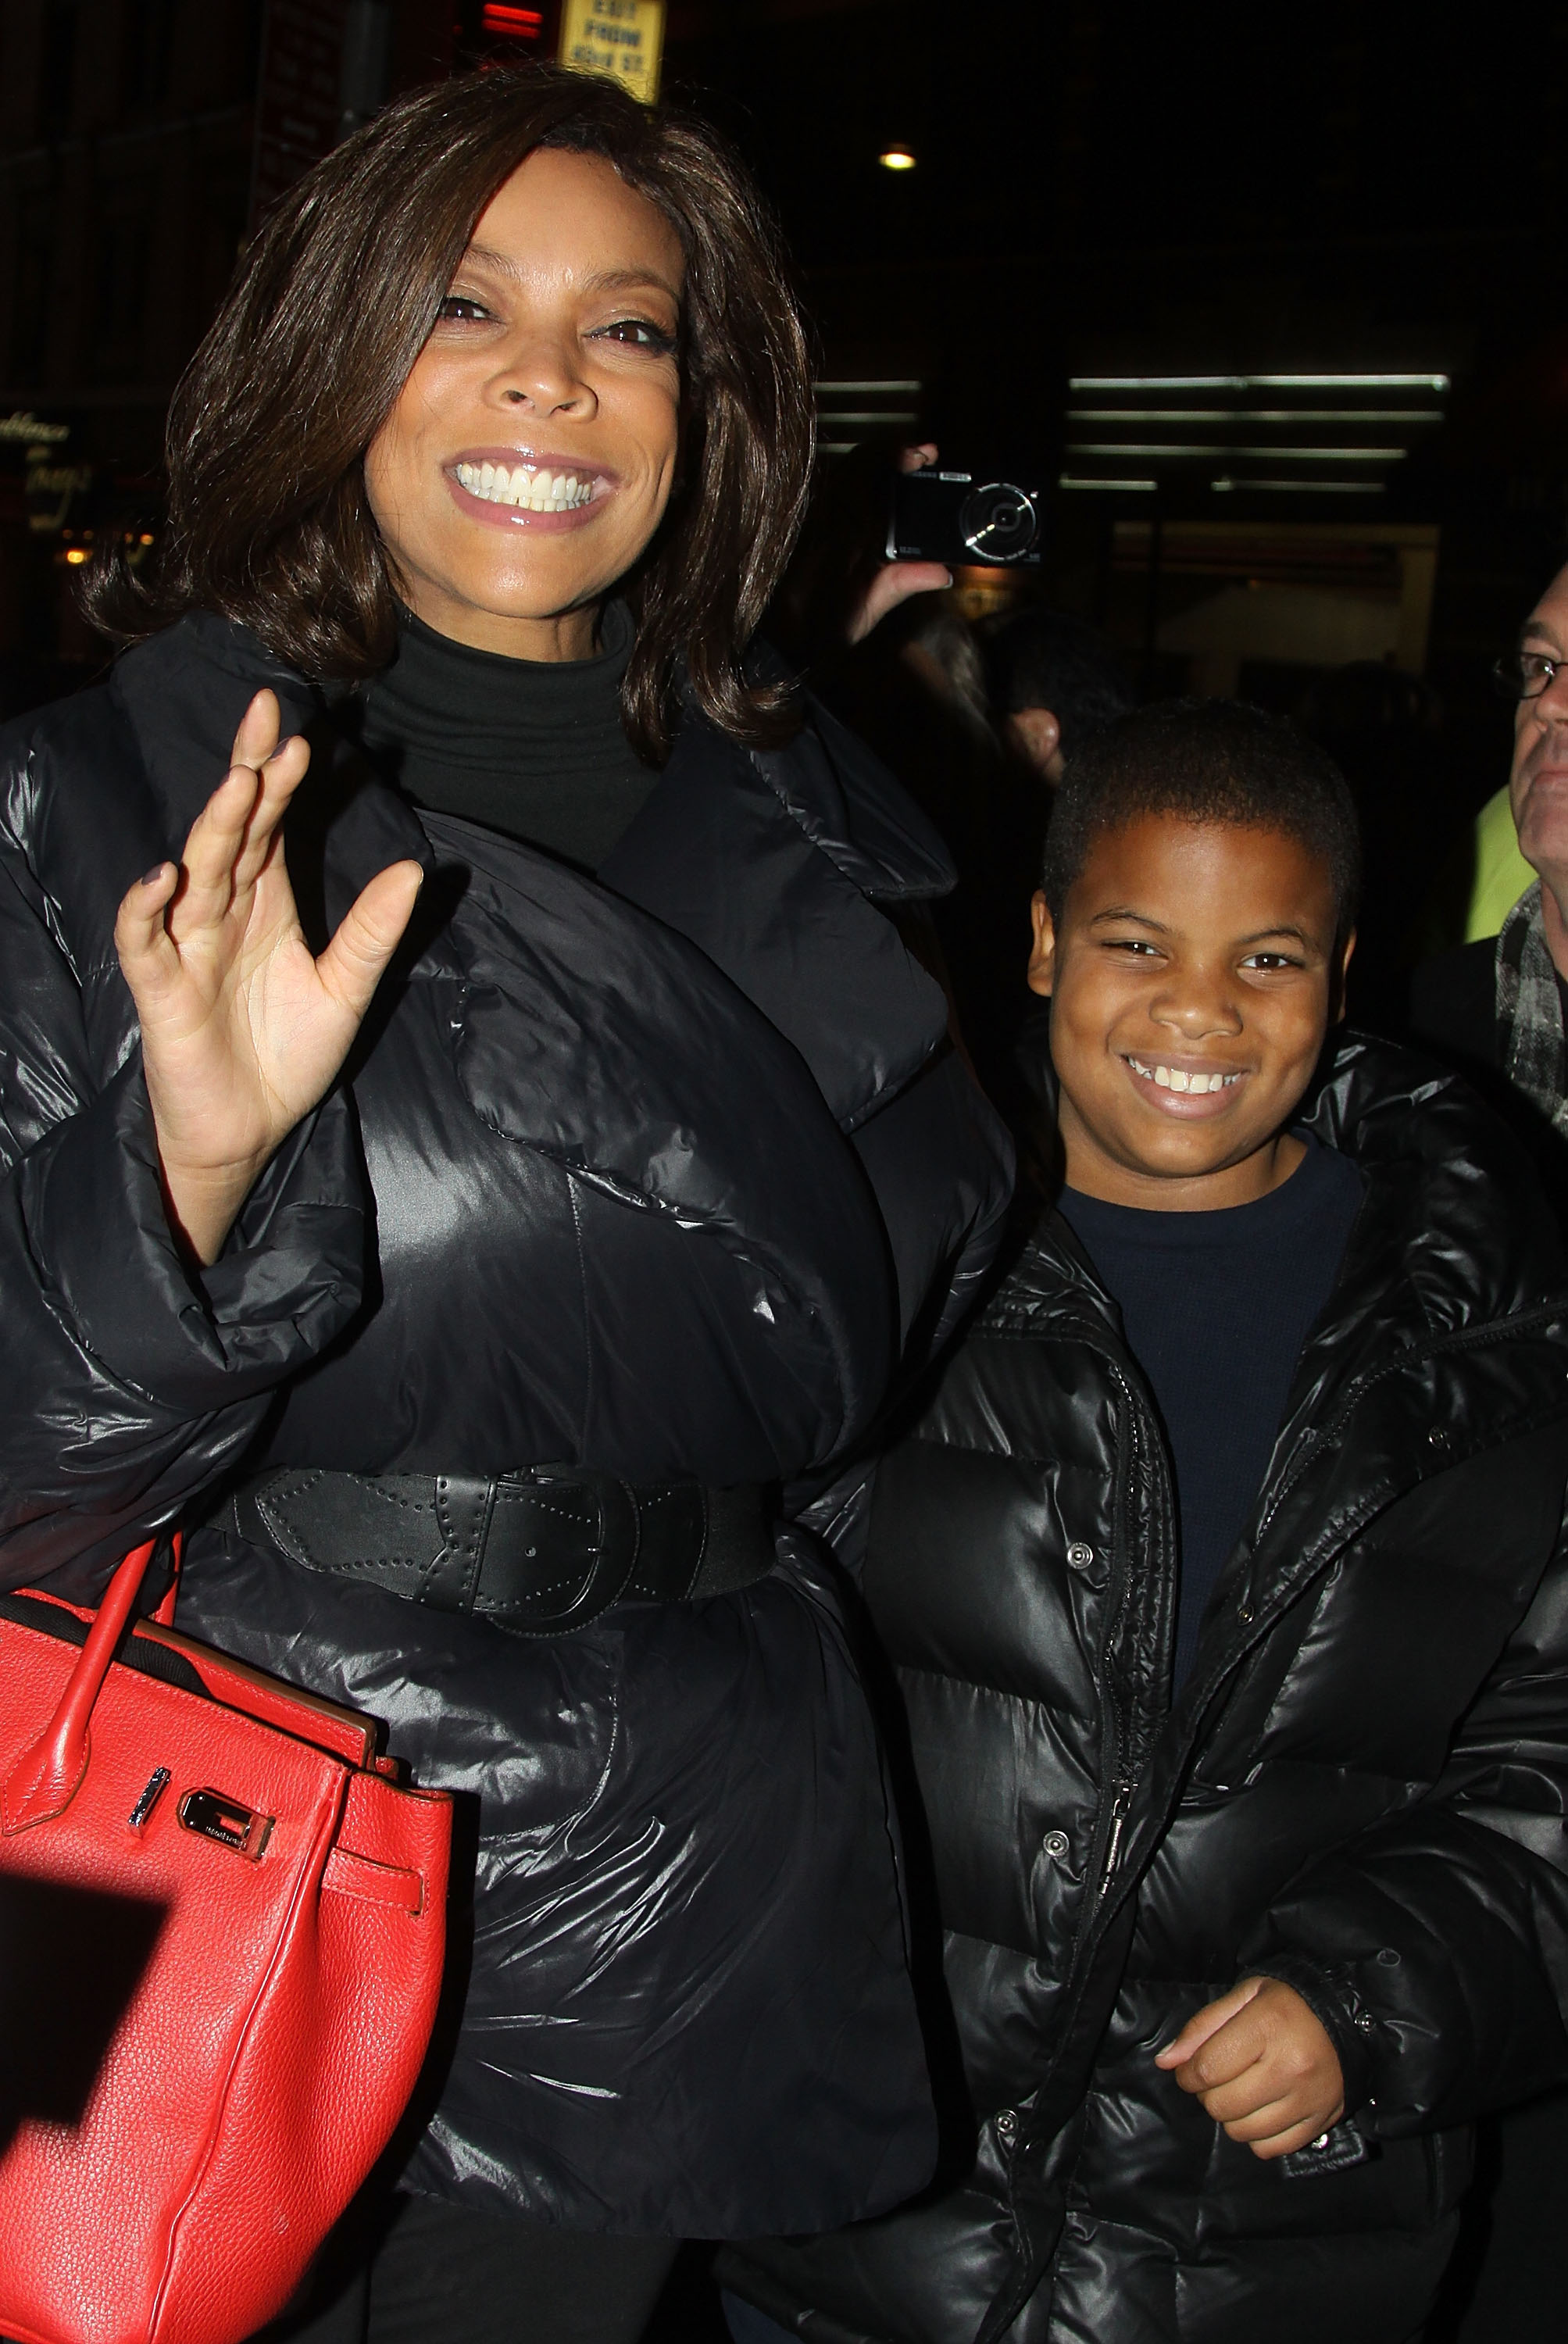 Wendy Williams and her son pose at The Opening Night of "The Pee-Wee Herman Show" on Broadway on November 11, 2010, in New York City | Source: Getty Images